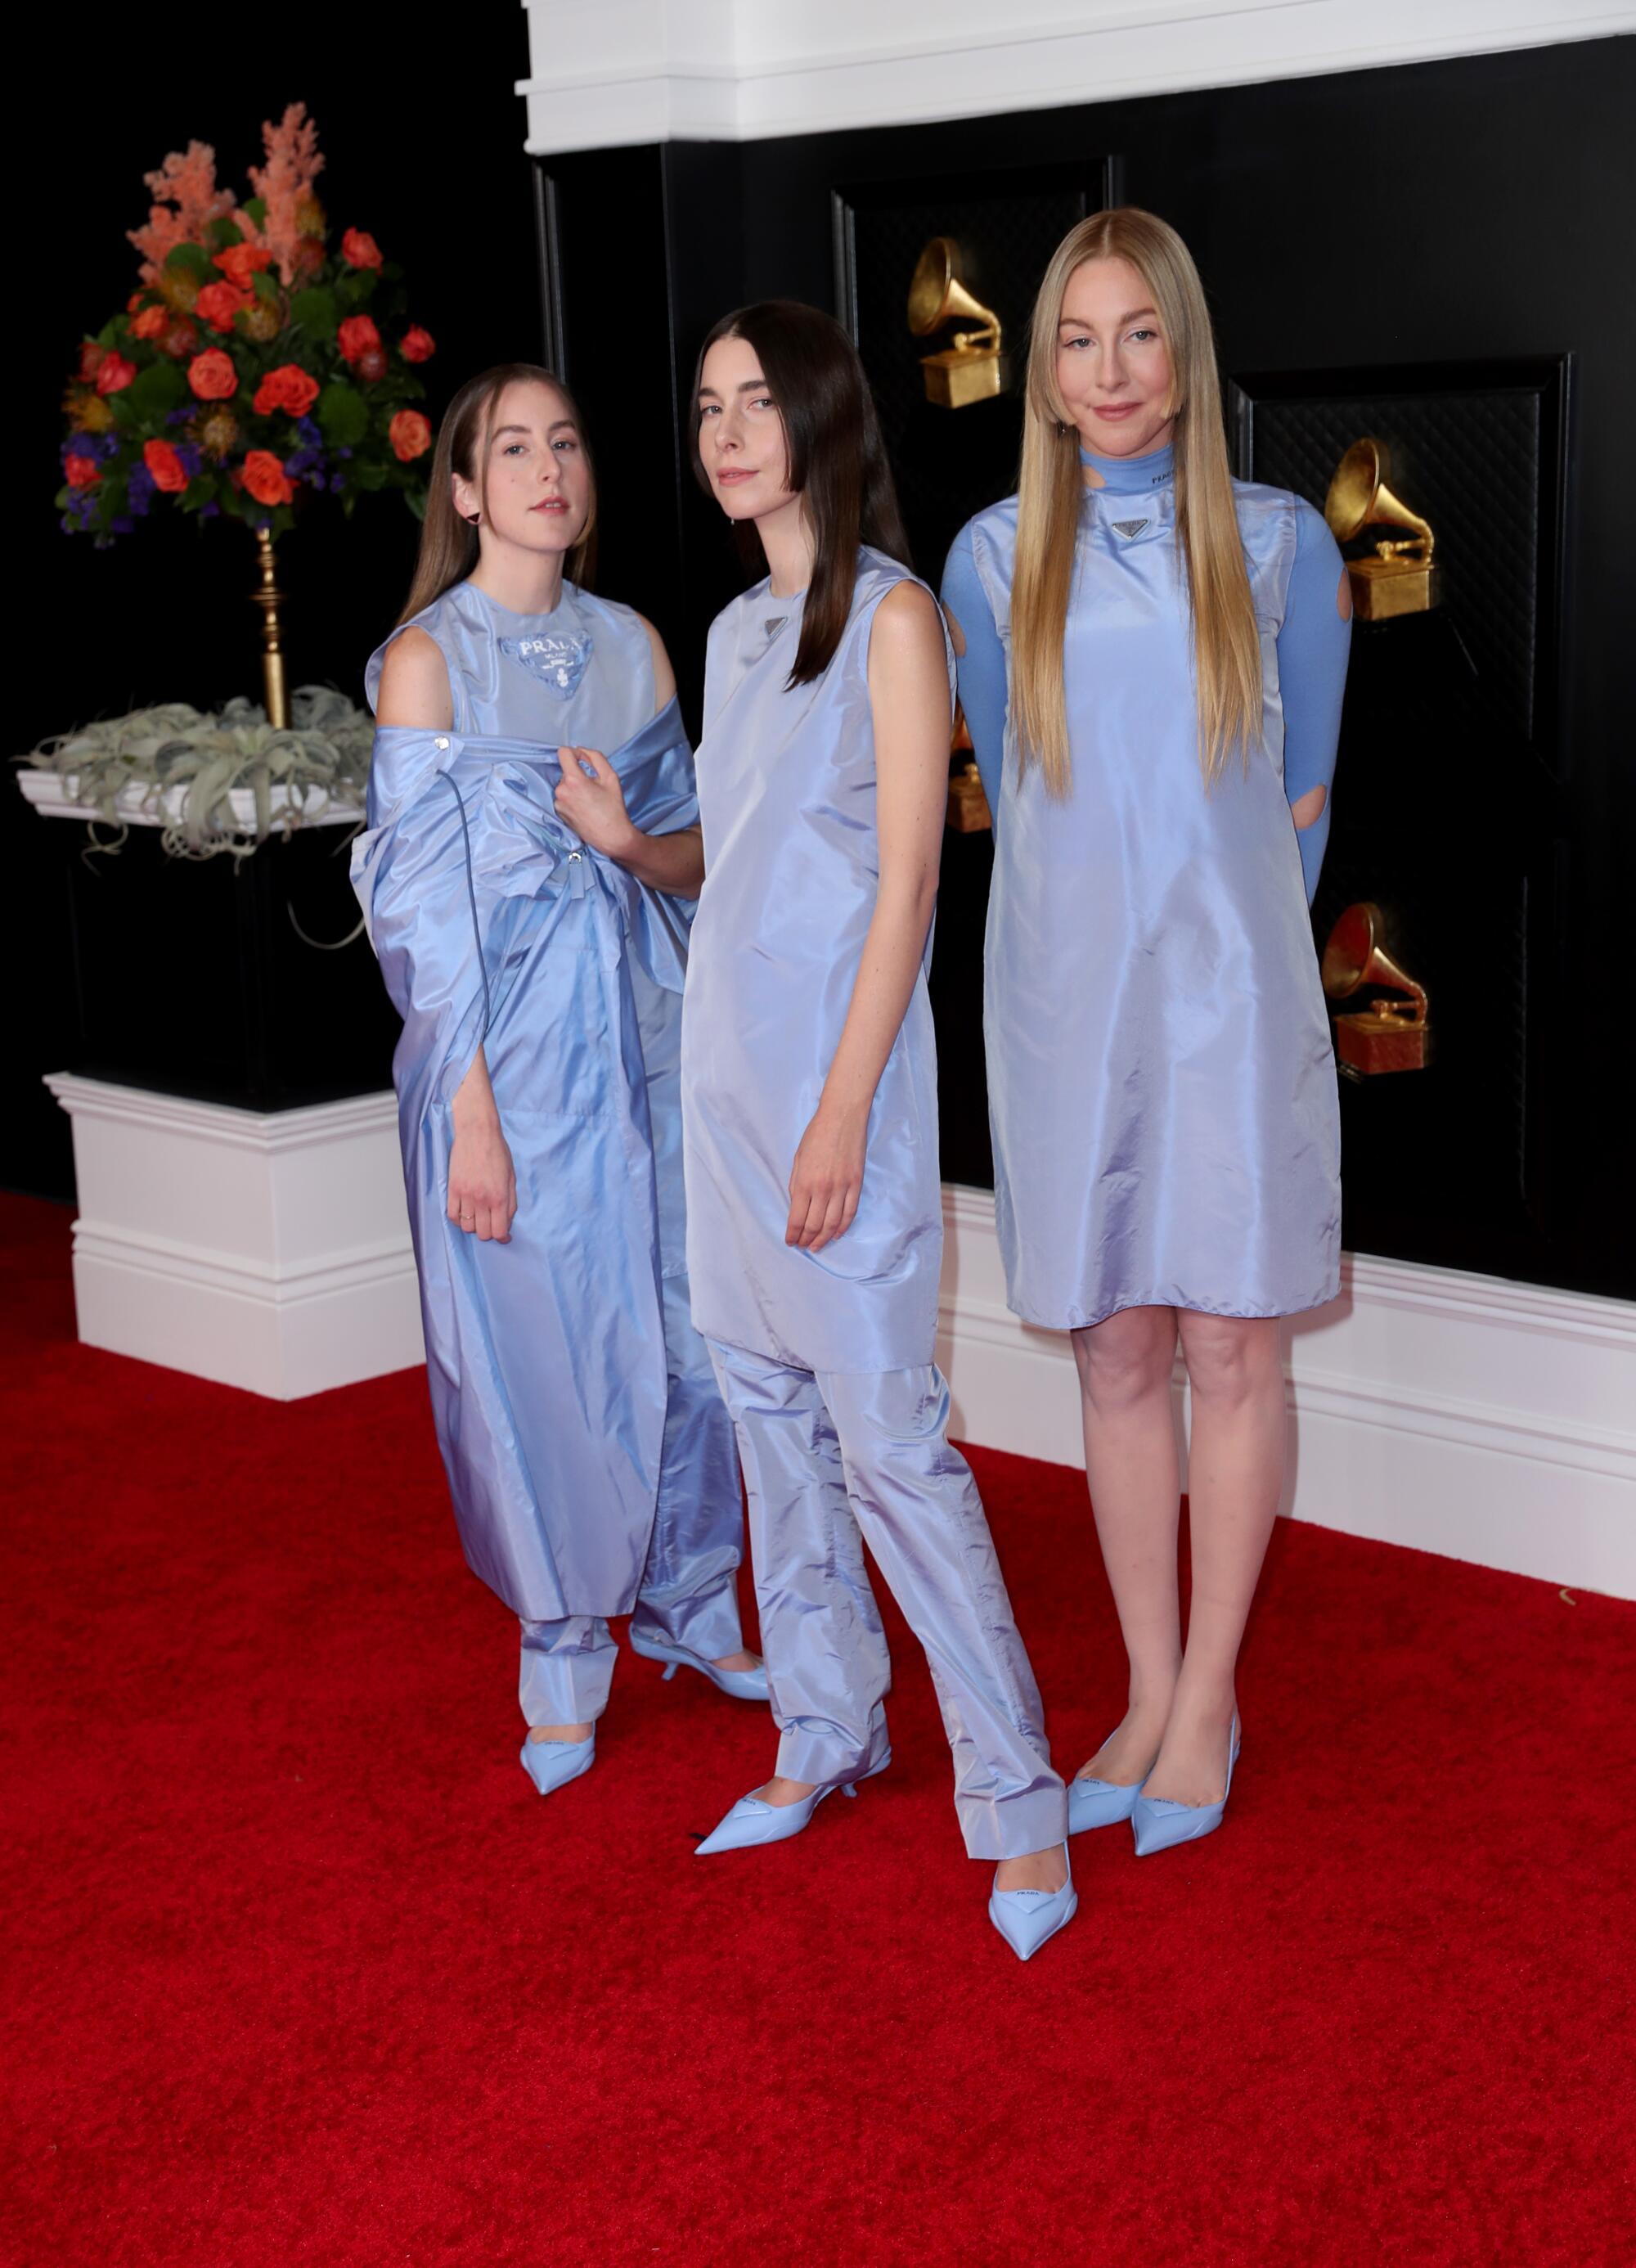 The three Haim sisters in coordinating pale blue outfits on the red carpet at the 63rd Grammy Awards.